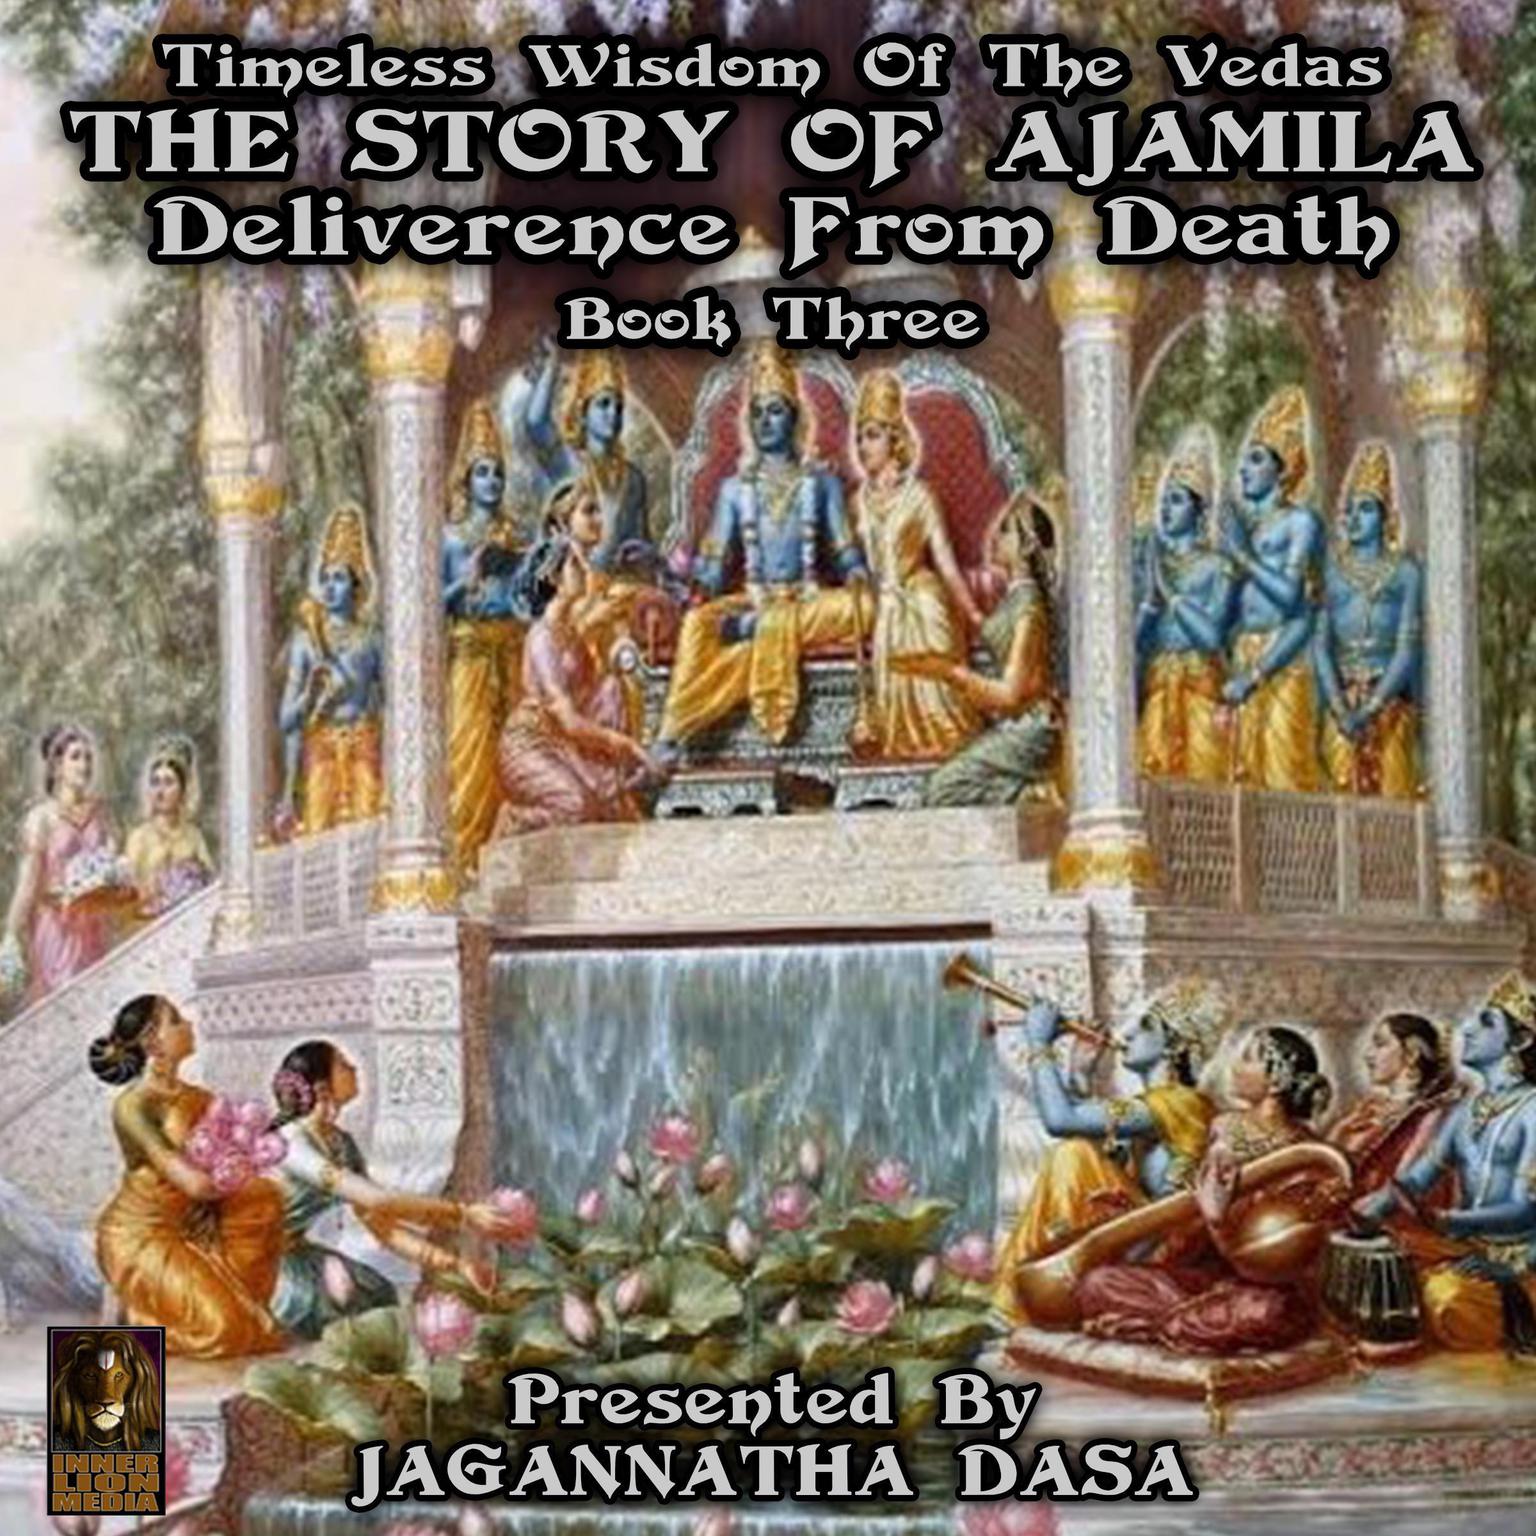 Timeless Wisdom Of The Vedas The Story Of Ajamila Deliverence From Death - Book Three (Abridged) Audiobook, by unknown